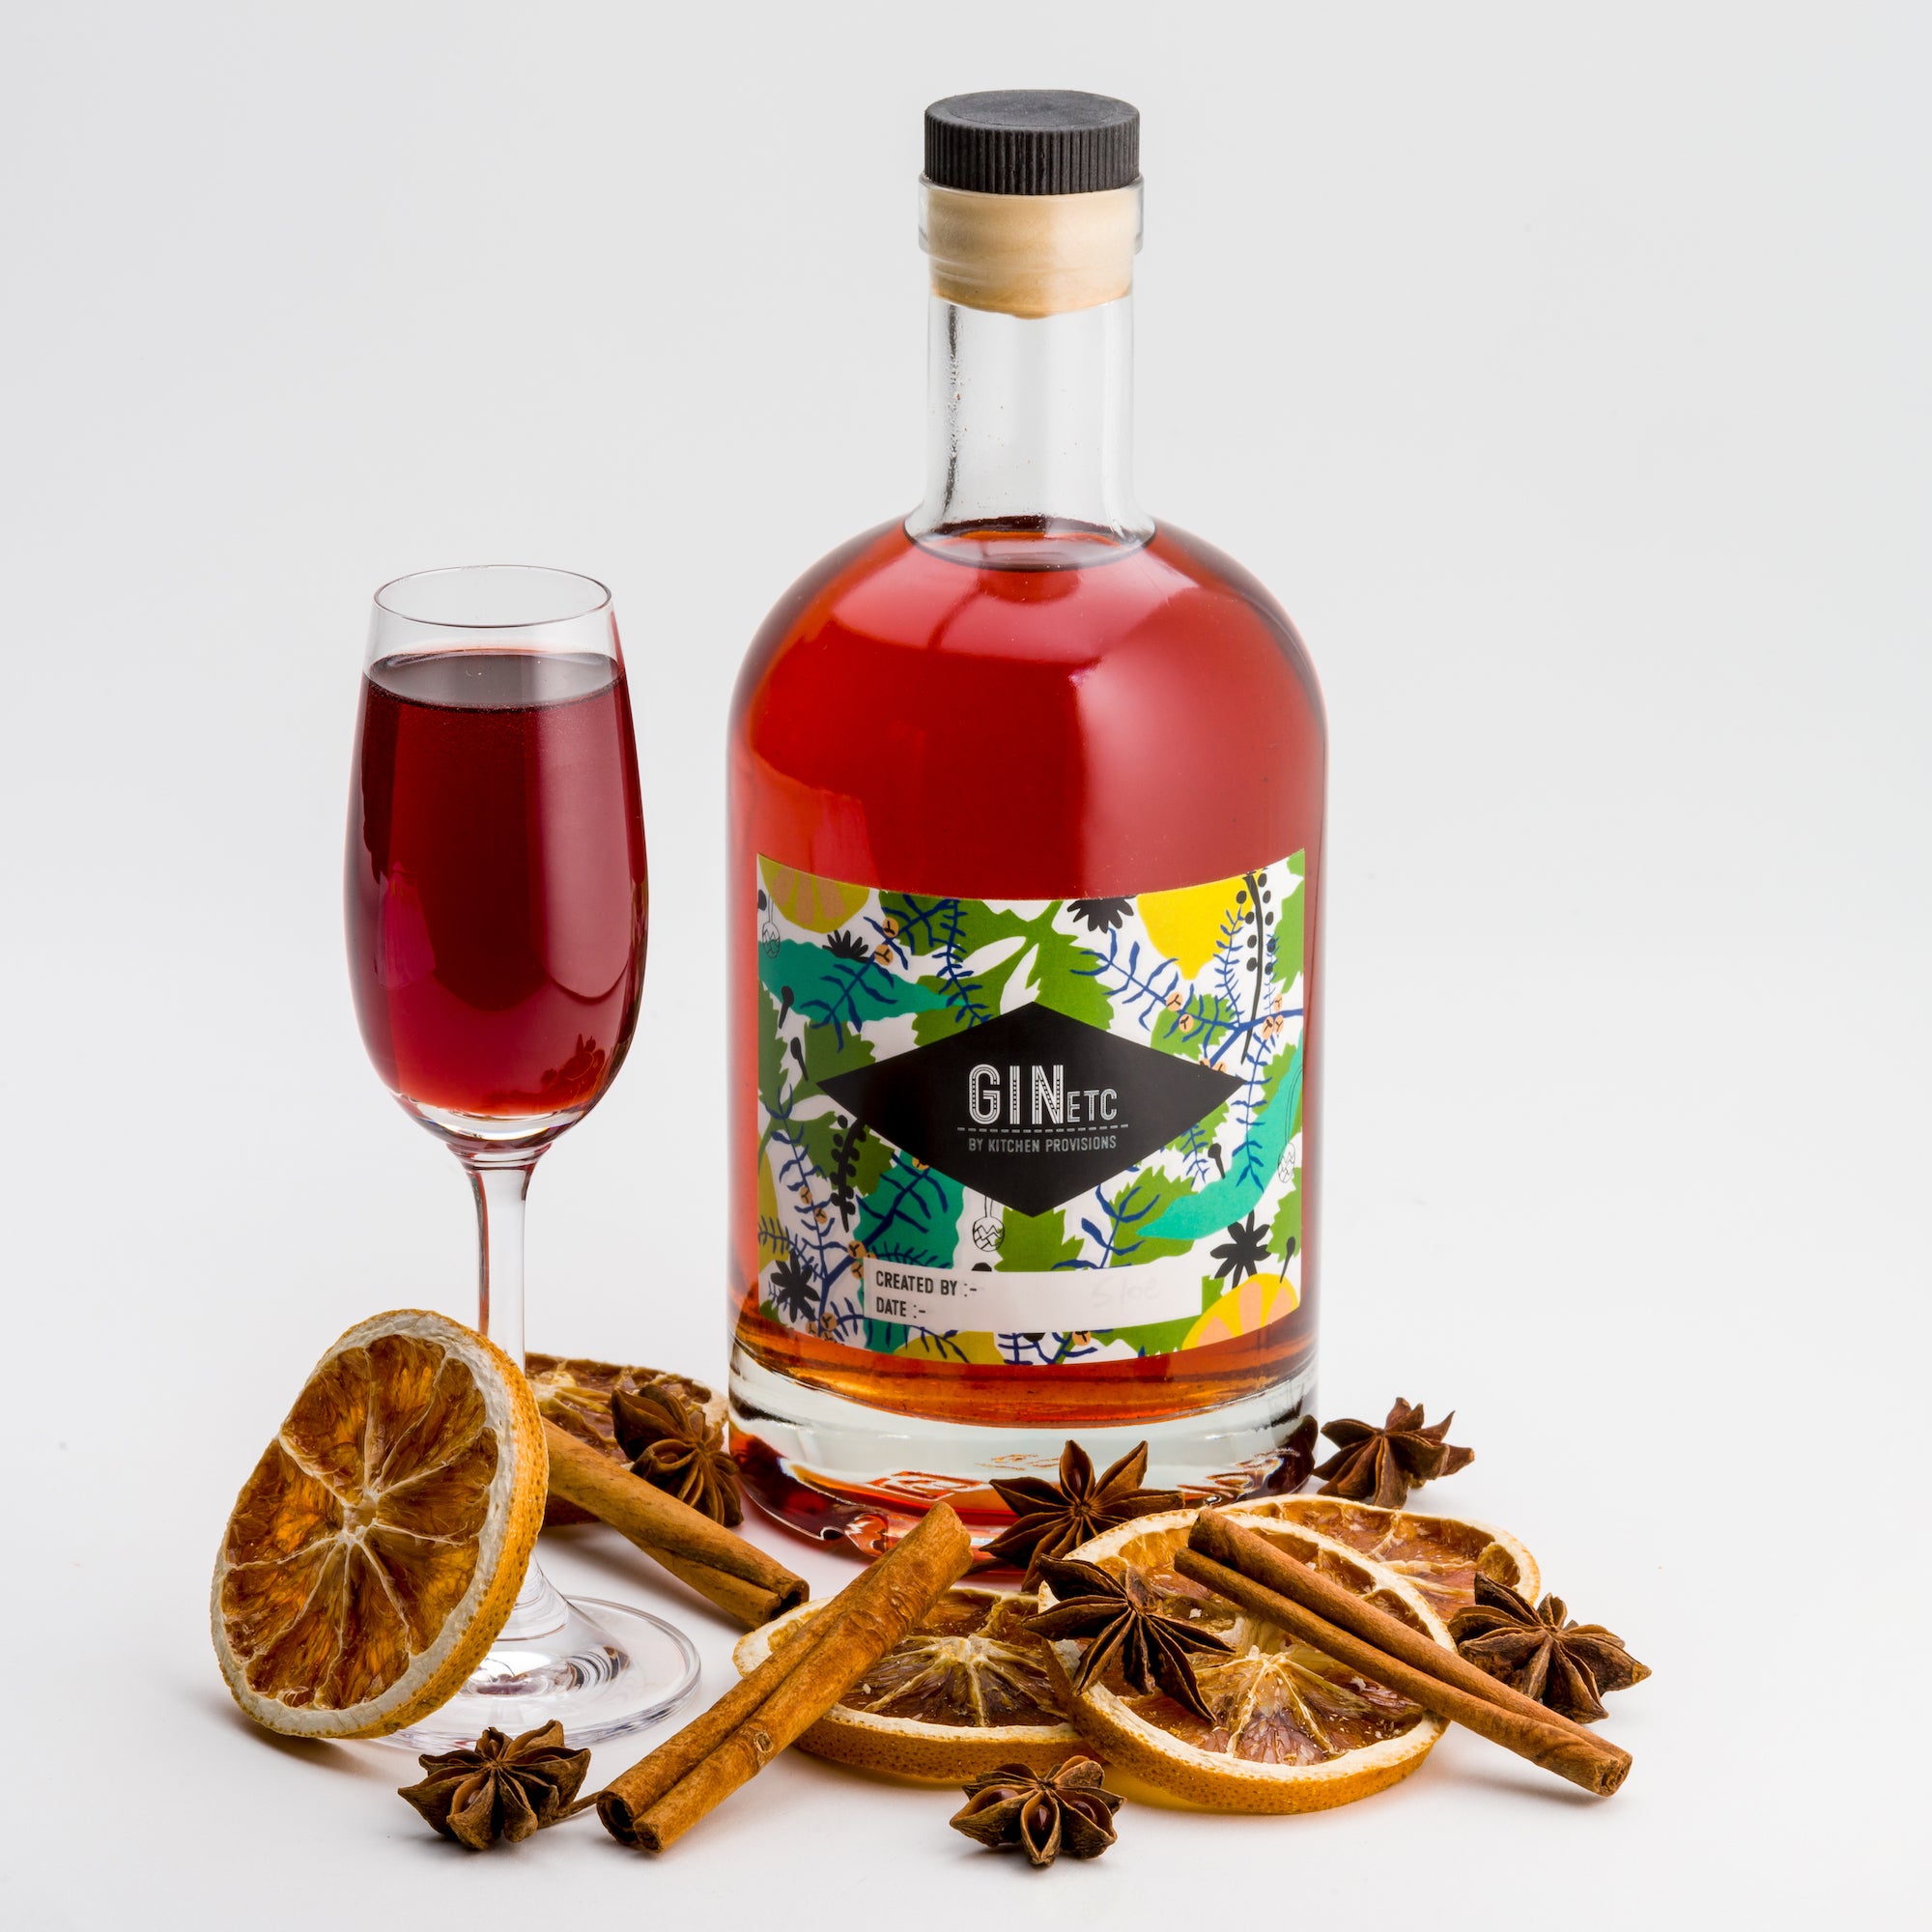 Gin Etc. Gin Maker's Kit - The Hedgerow Create you own Blended Sloe Gin